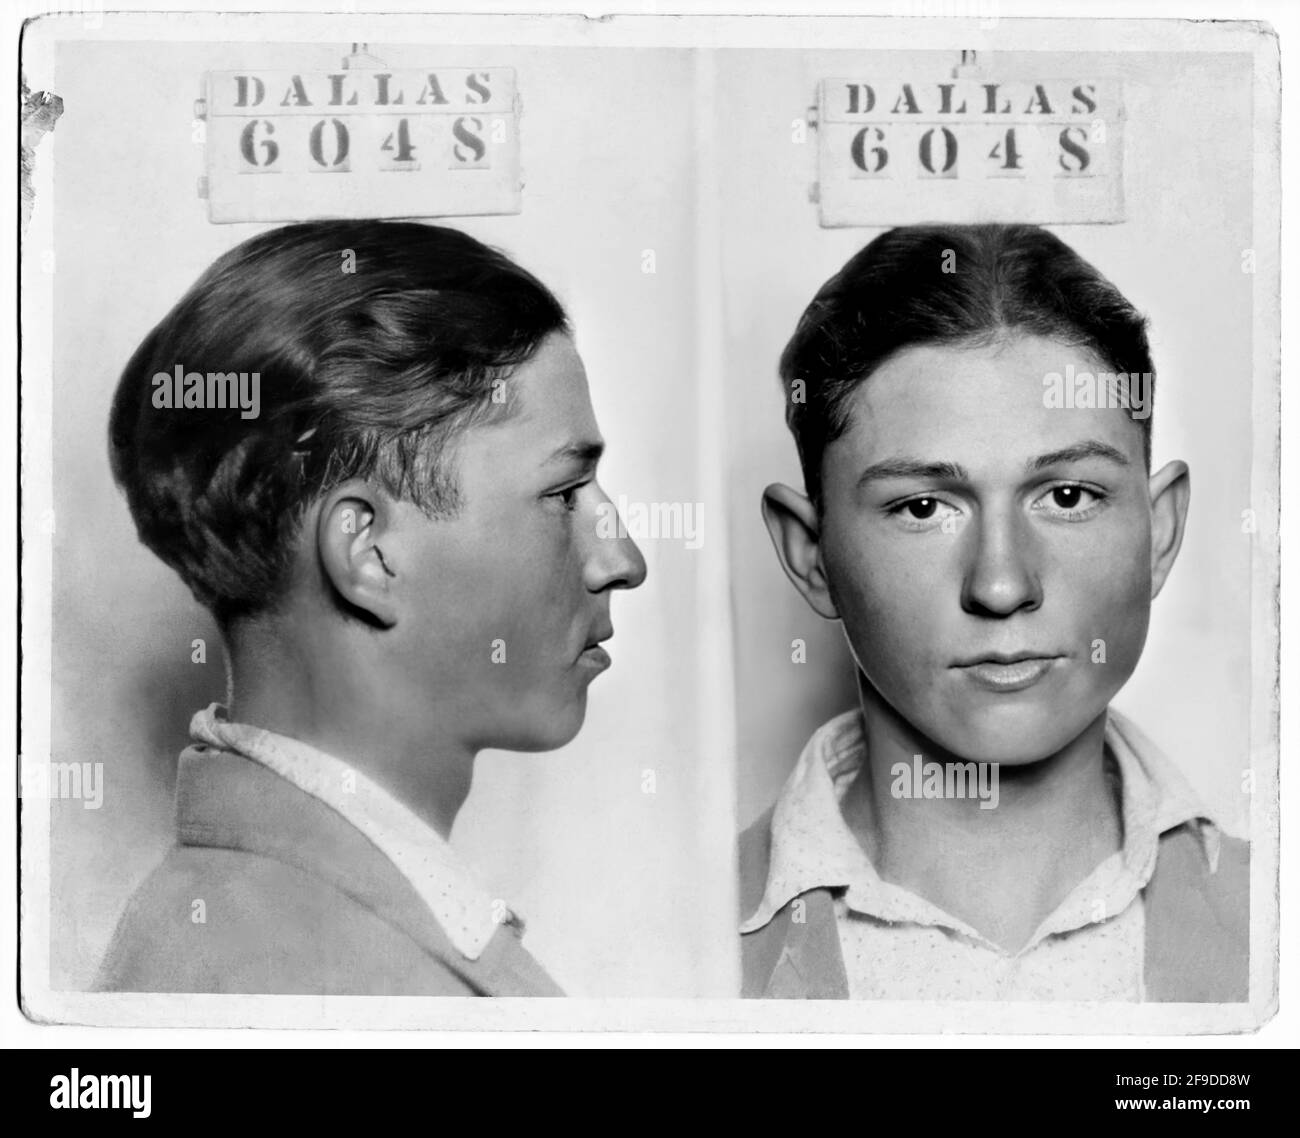 1926 , Dallas , Texas , USA : The Clyde Barrow , aged 17 ca, Mug Shot - Police Dept. Dallas 6048 . The famous gangsterns couple  BONNIE PARKER  ( 1910 - 1934 ) and CLYDE BARROW ( 1909 - 1934 ). Contrary to popular belief the two never married. They were in a long standing relationship. Posing in front of a 1932 Ford V8 automobile. Recovered from Bonnie and Clyde after their deaths on May 23, 1934 . Unknown photographer . - MUGSHOT - Mug-Shot - OUTLAWS - KILLER - ASSASSINO - delinquente - criminalità organizzata  - GANGSTERN - Bos - CRONACA NERA - CRIMINALE - FOTO SEGNALETICA - Caserma Dipartim Stock Photo